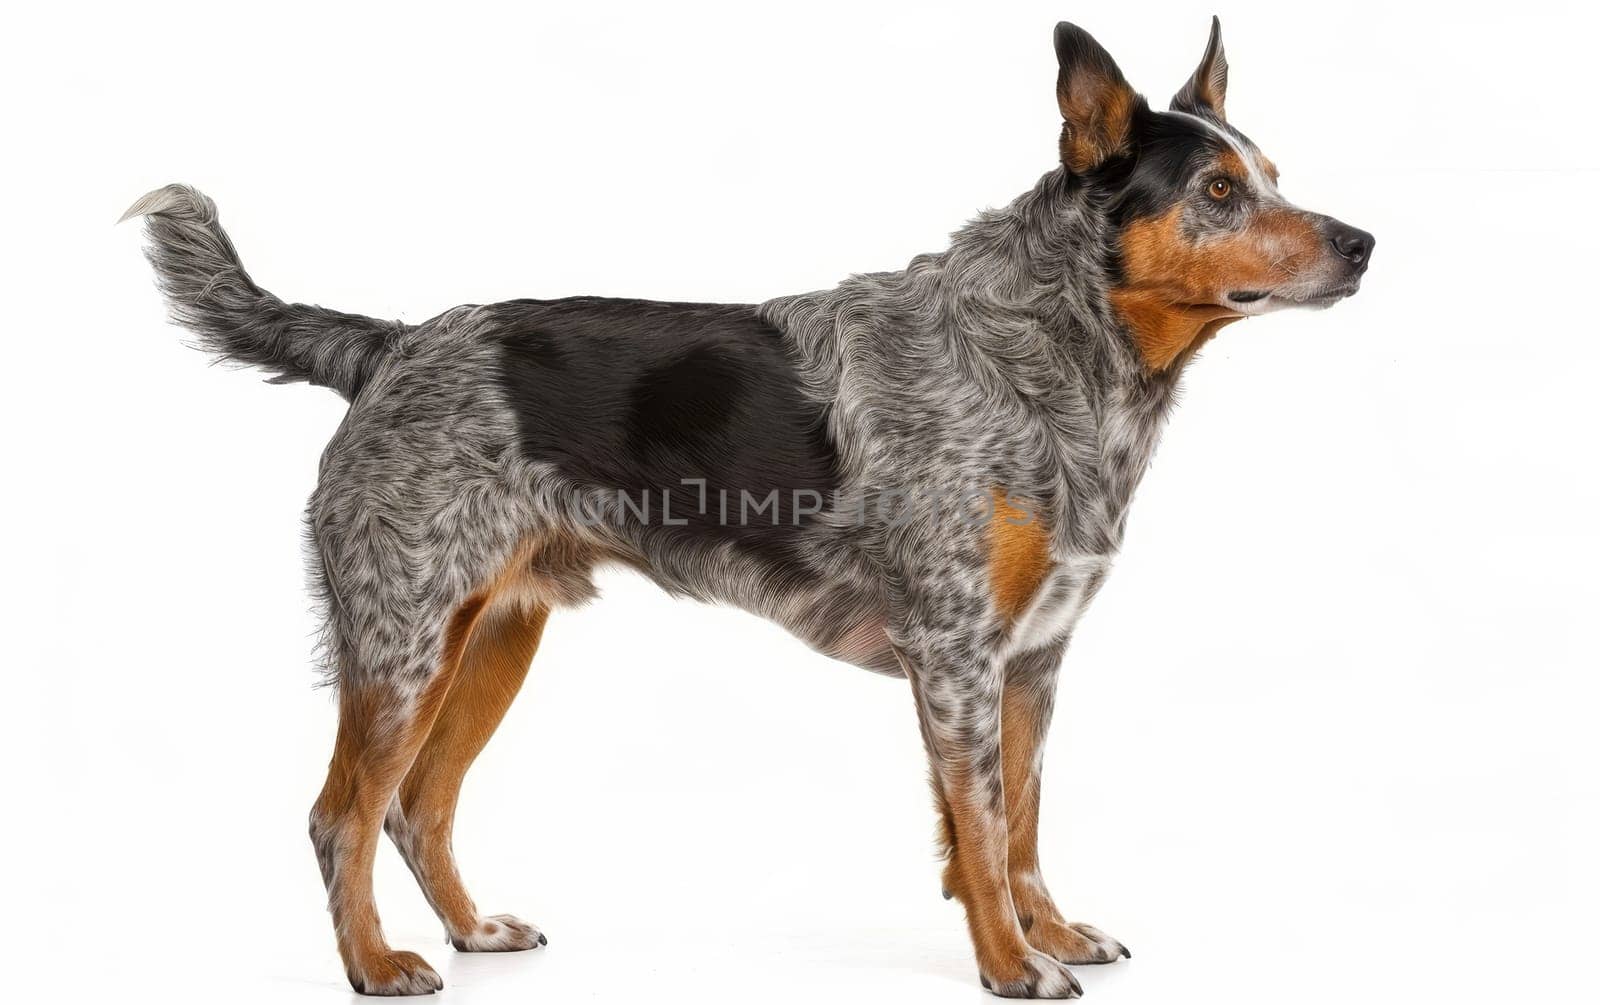 An Australian Cattle Dog stands in profile, ears perked and eyes vigilant. The photo captures the breed's muscular frame and distinctive coat pattern. by sfinks